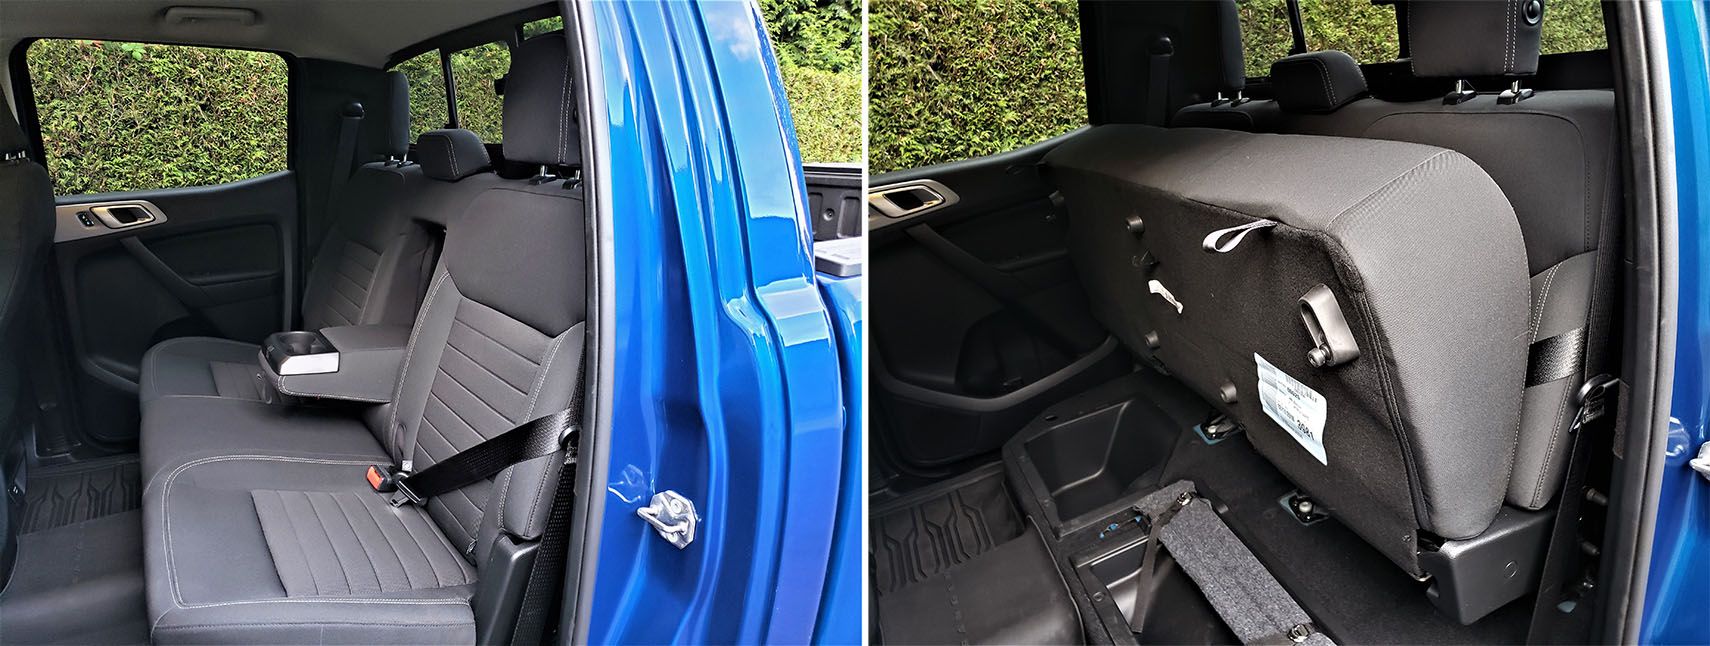 The 2020 Ford Ranger XLT SuperCrew 4x4's rear seating area with the seat down and bottom cushion flipped up to show maximum storage capacity.